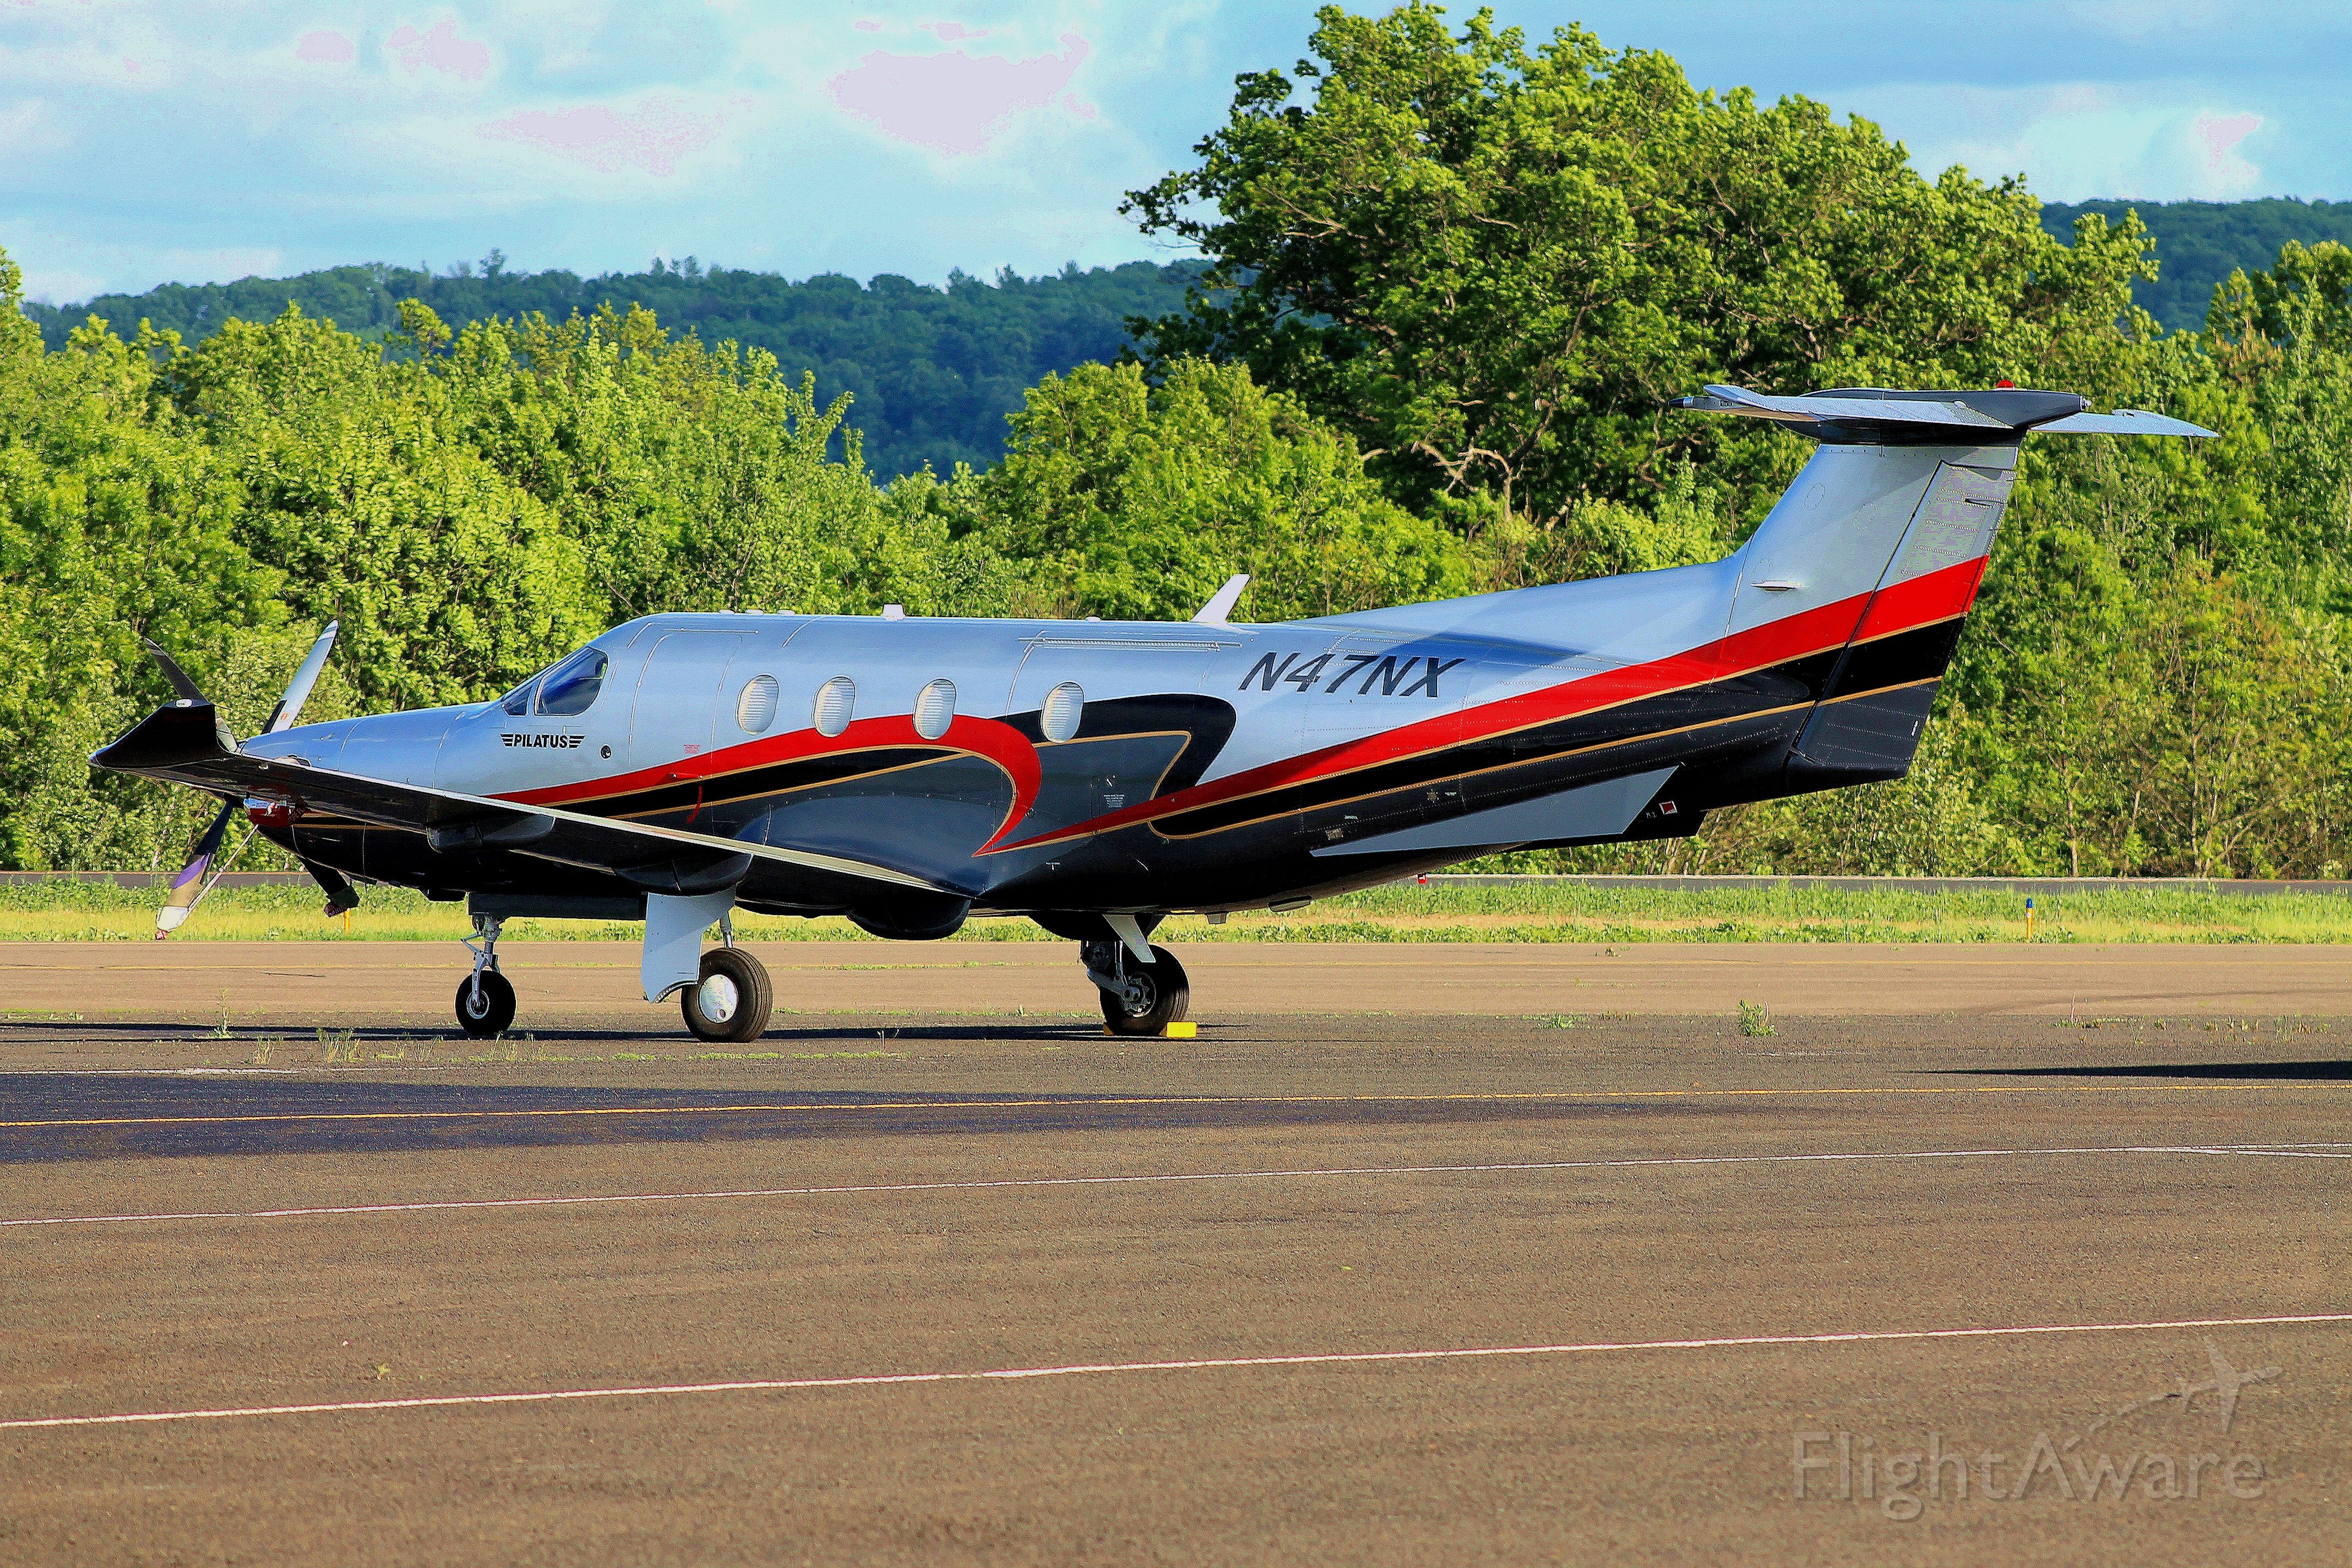 Pilatus PC-12 (N47NX) - Pilatus N47NX parked outside its hangar on a chilly spring evening, prepared for its morning flight to California the next day. Photo taken on May 26, 2013.